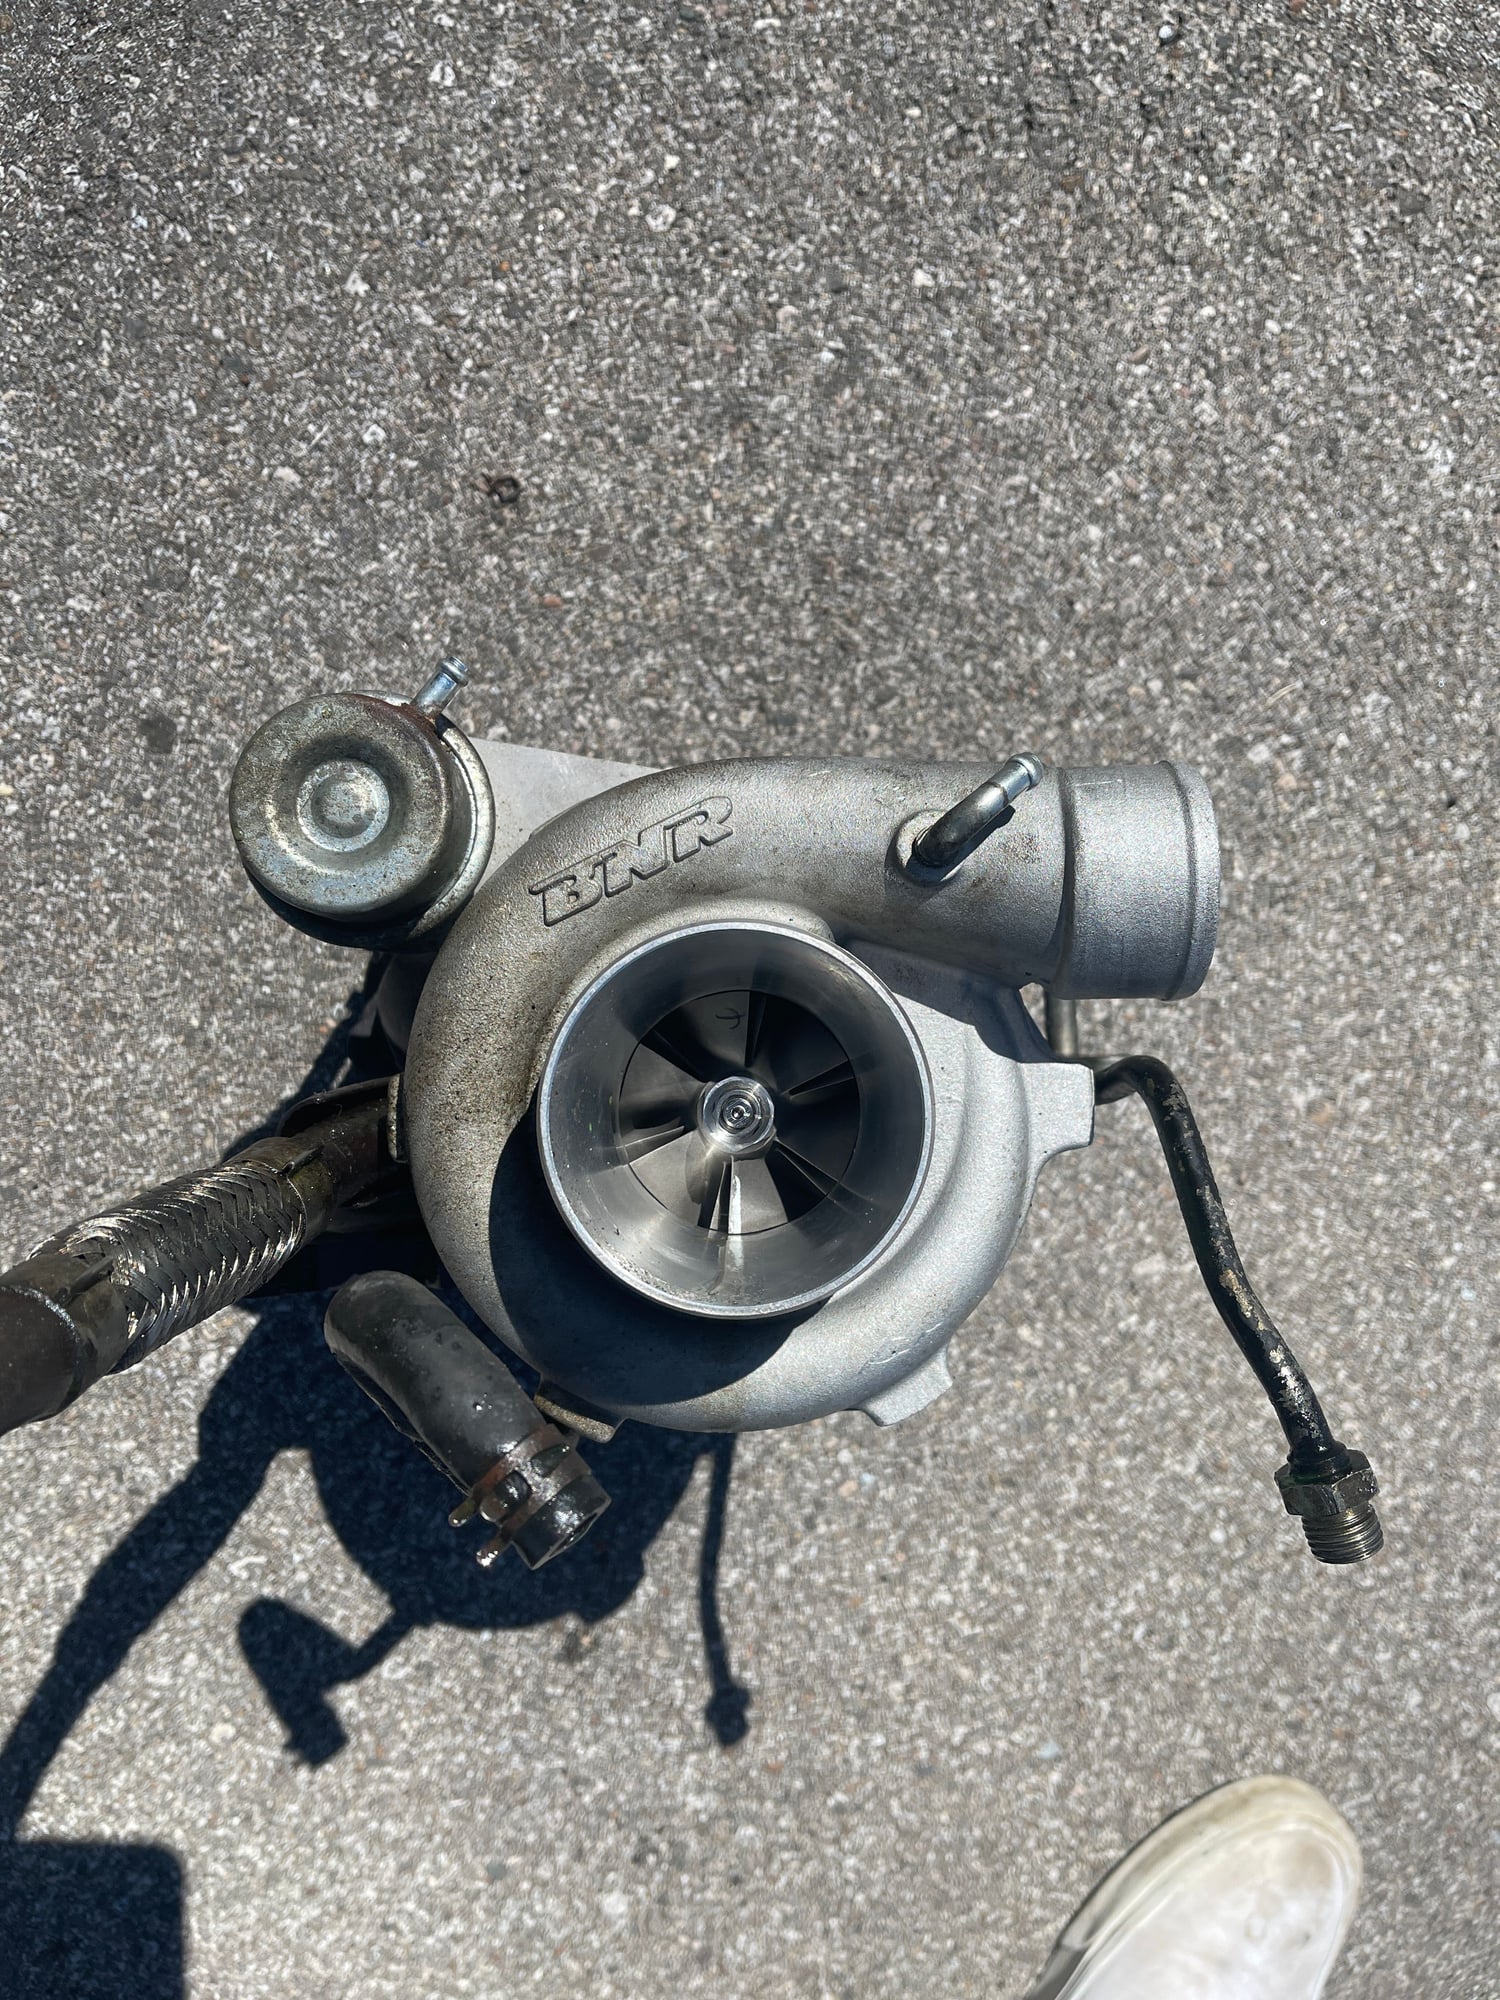 Engine - Power Adders - S5 FC3S BNR Turbocharger Stage 1 - Used - 1989 to 1991 Mazda RX-7 - Grand Rapids, MI 49546, United States